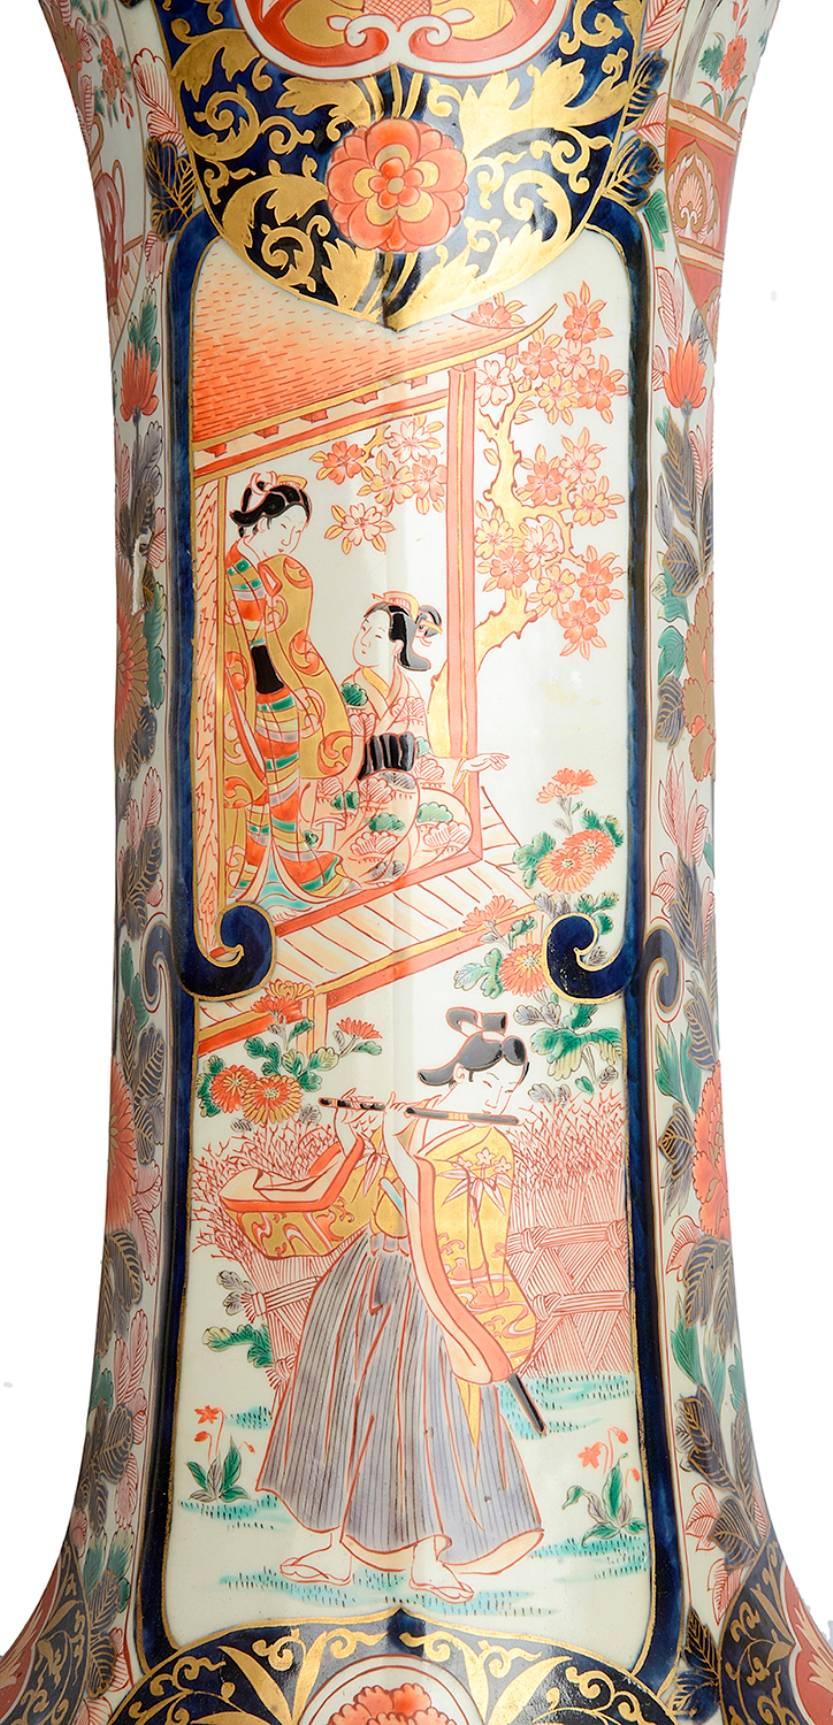 An large and impressive pair of 18th century style Japanese Imari spill vases. Each with the classical Imari colors of blues and oranges. The ground with flowers scrolls and motifs and dragons amongst clouds. The inset panels depicting Geisha girls